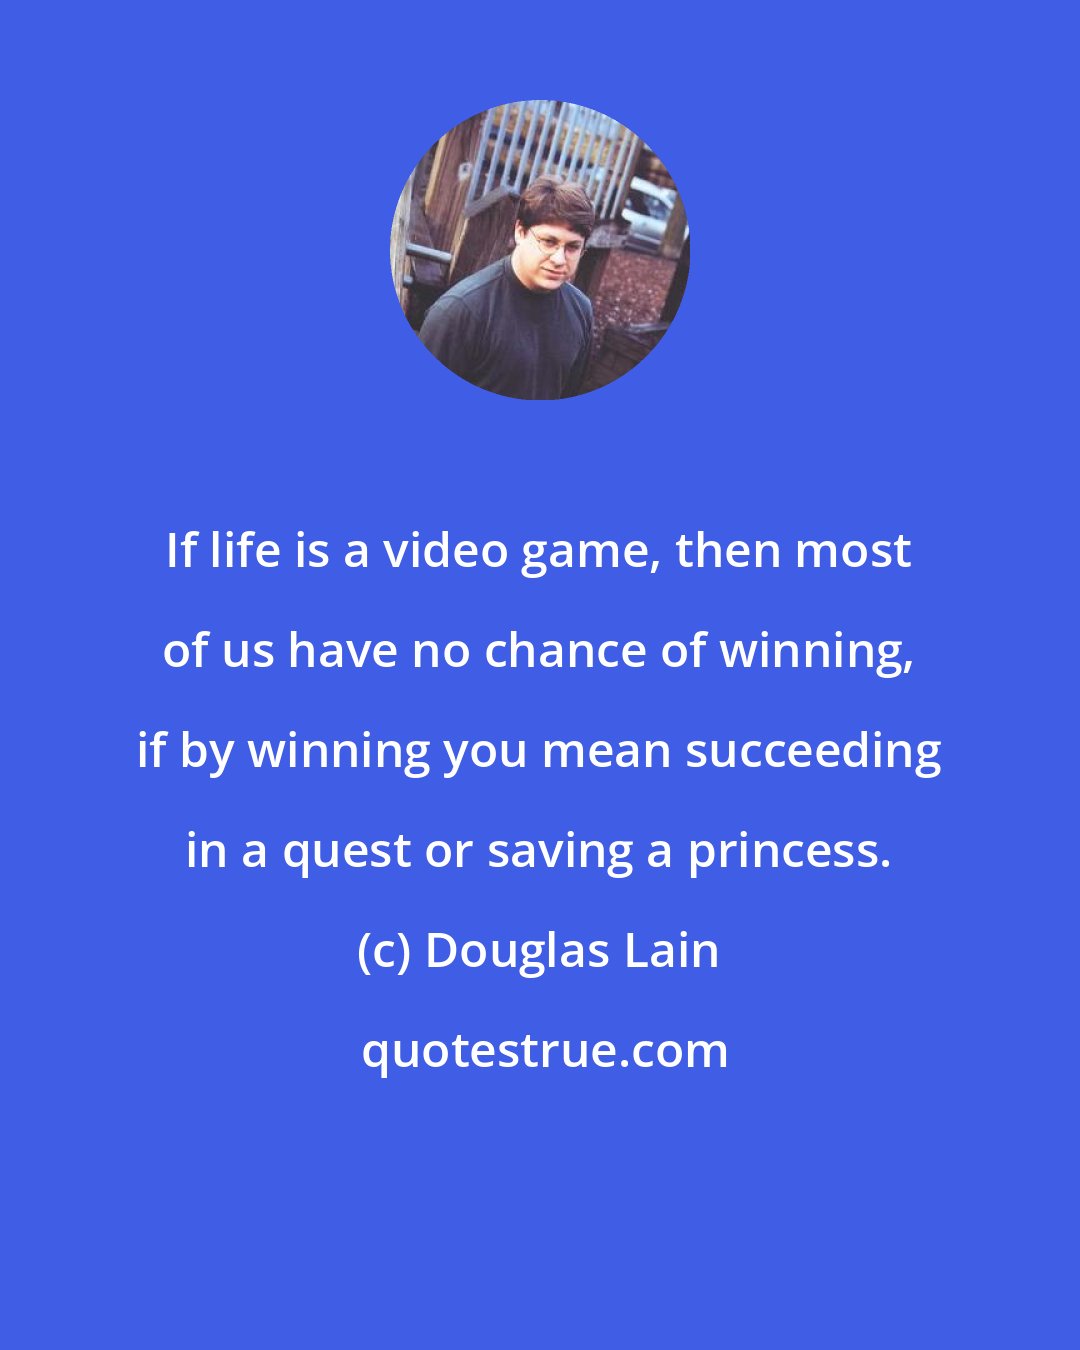 Douglas Lain: If life is a video game, then most of us have no chance of winning, if by winning you mean succeeding in a quest or saving a princess.